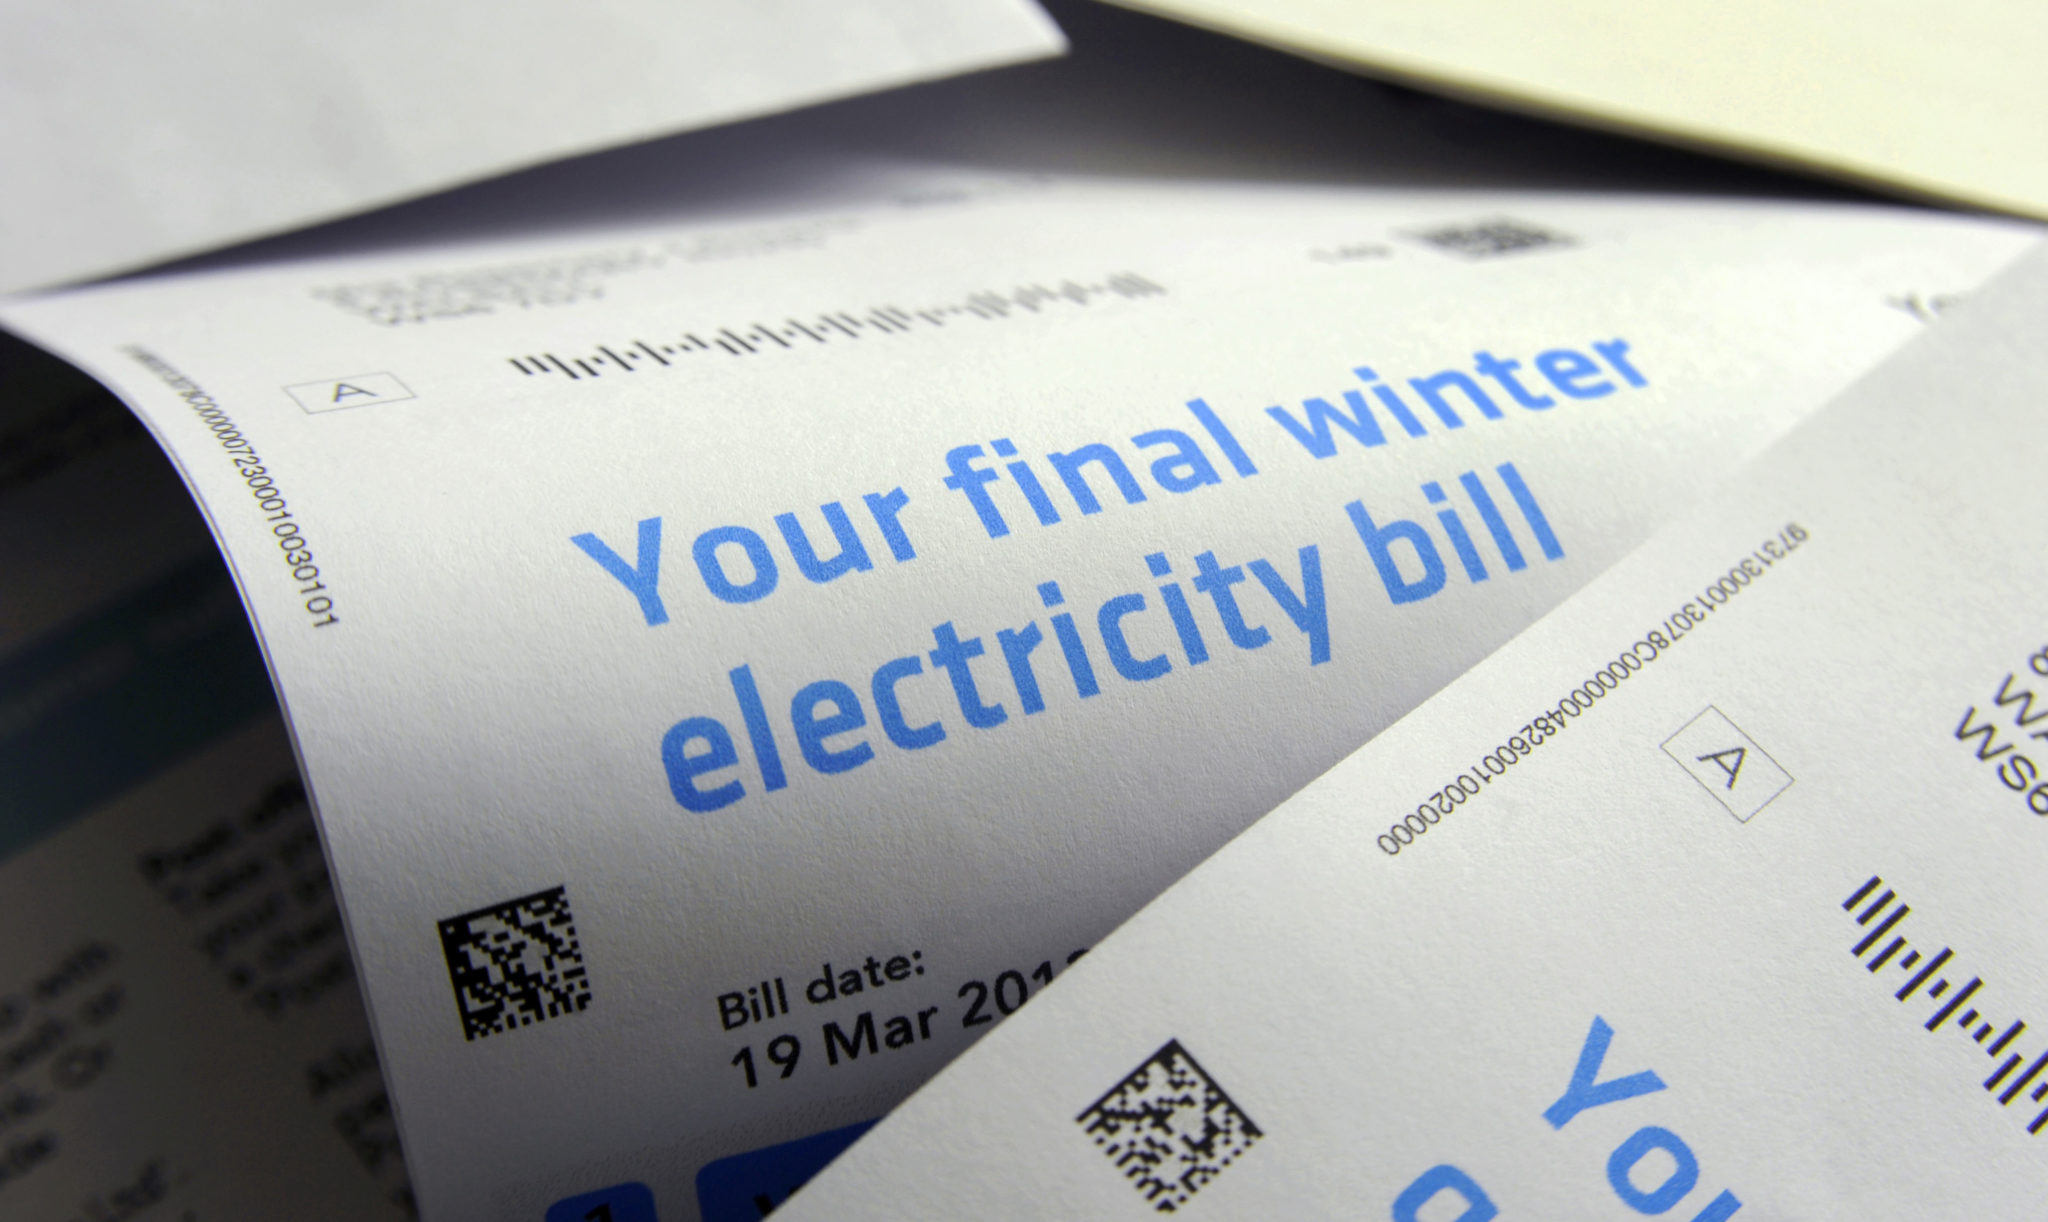 An electricity bill is seen in this 2013 file photo.